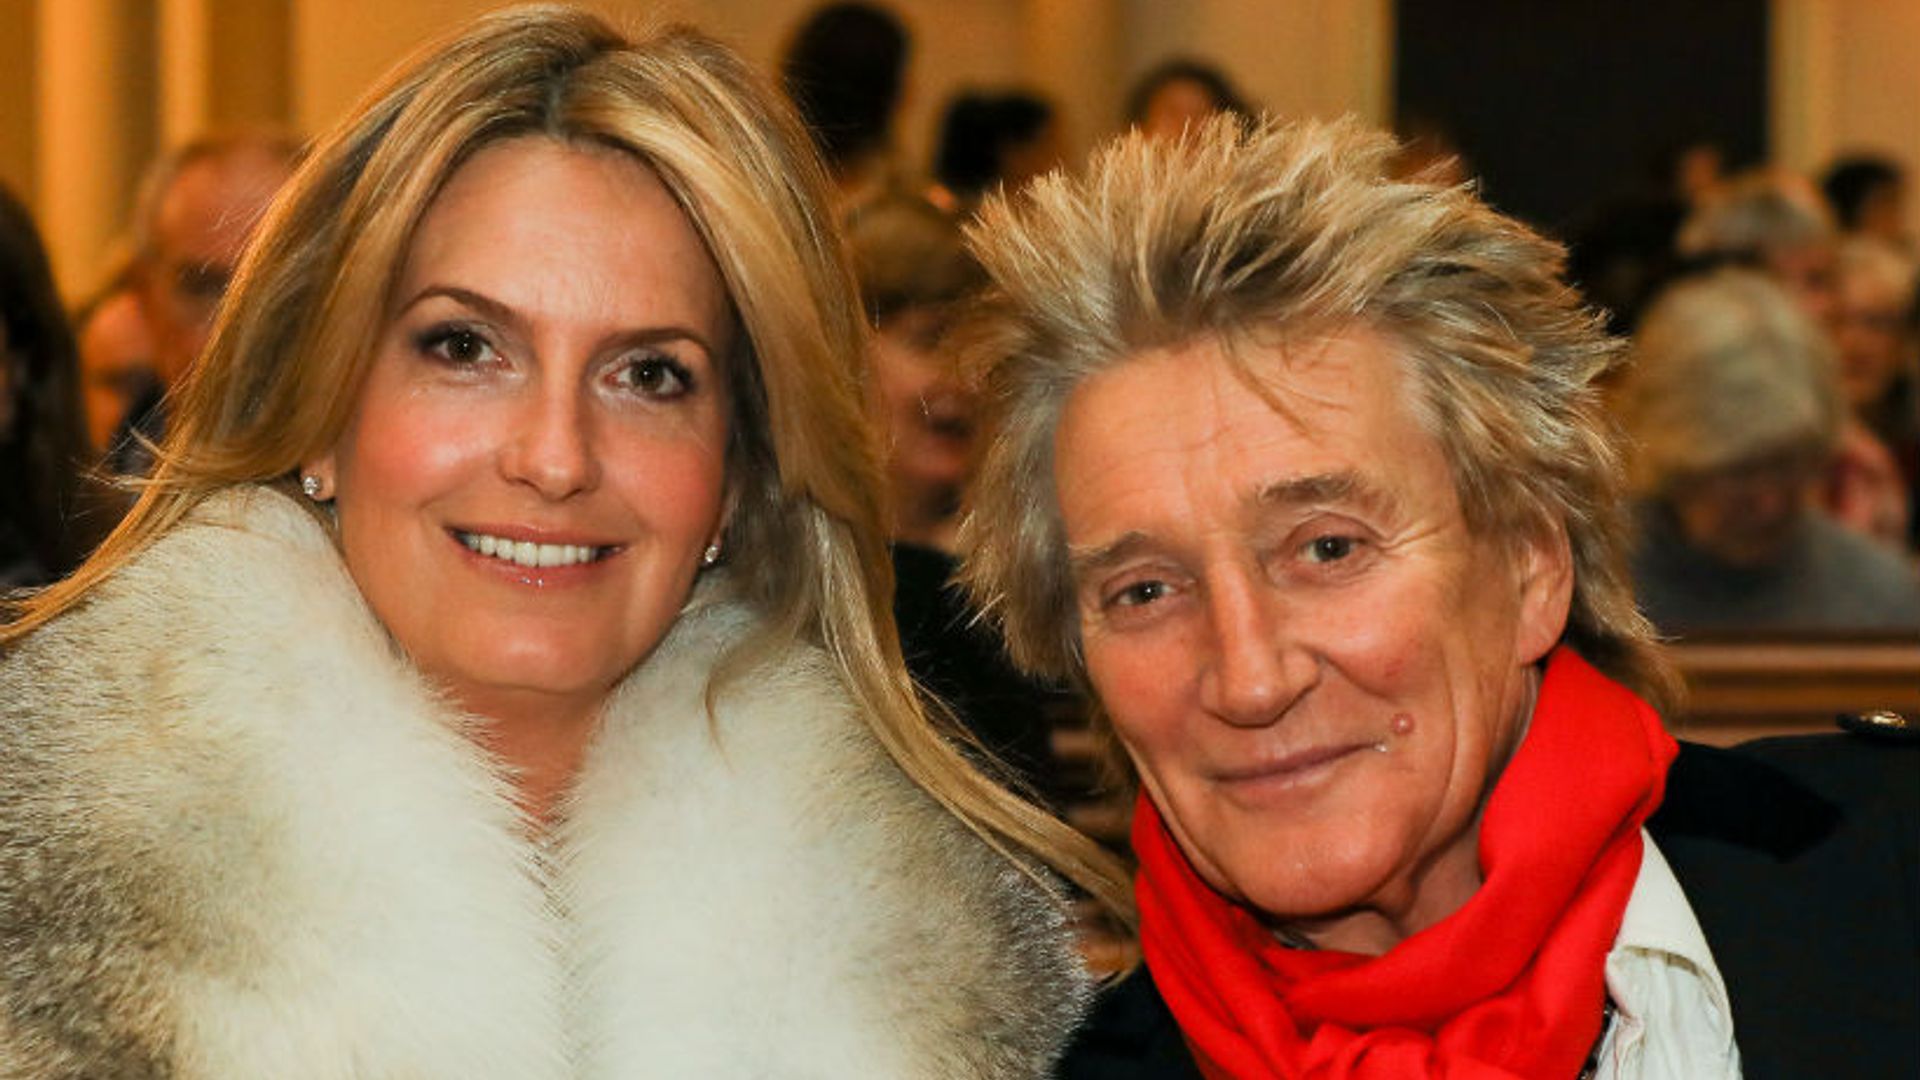 Penny Lancaster opens up about dyslexia diagnosis – and how Rod Stewart reacted